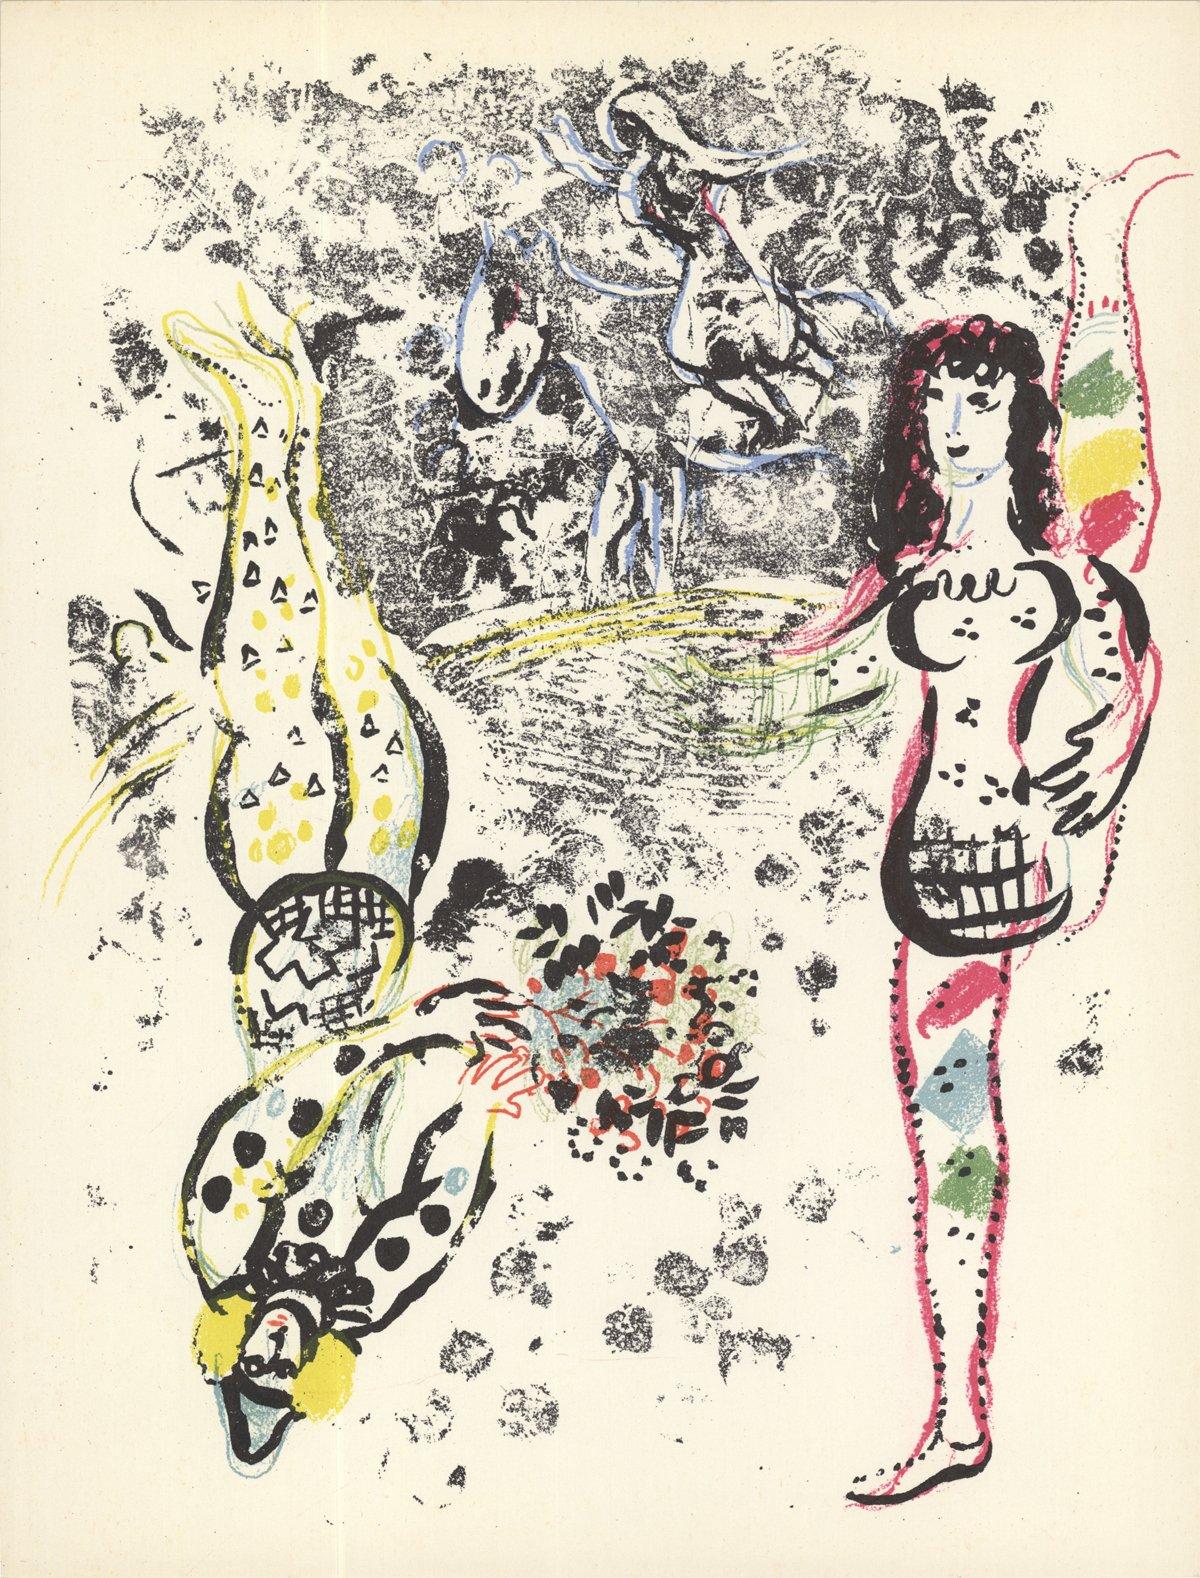 Paper Size: 12.5 x 9.5 inches ( 31.75 x 24.13 cm )
 Image Size: 12.5 x 9.5 inches ( 31.75 x 24.13 cm )
 Framed: No
 Condition: A: Mint
 
 Additional Details: First edition lithograph from Chagall's Lithographs Volume II.
 
 Shipping and Handling: We